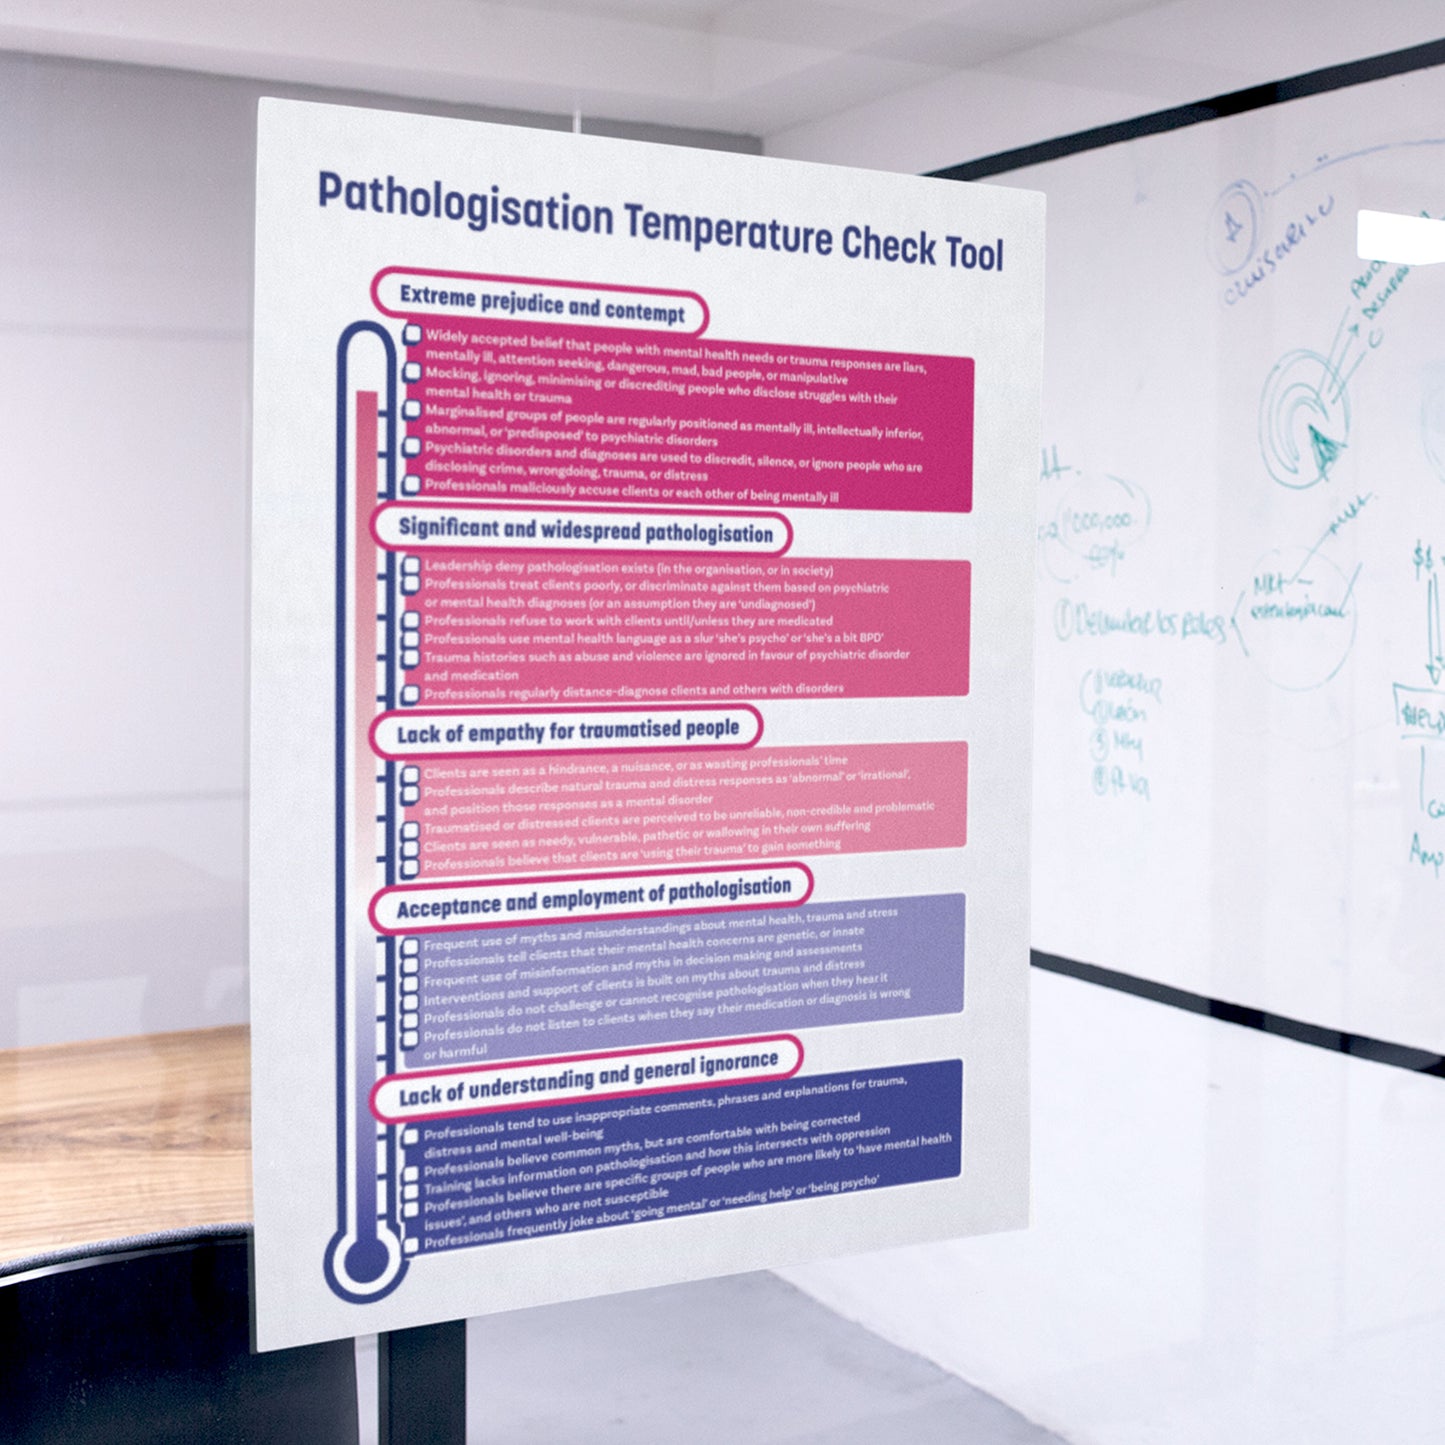 Pathologisation Temperature Check Tool A4 Poster